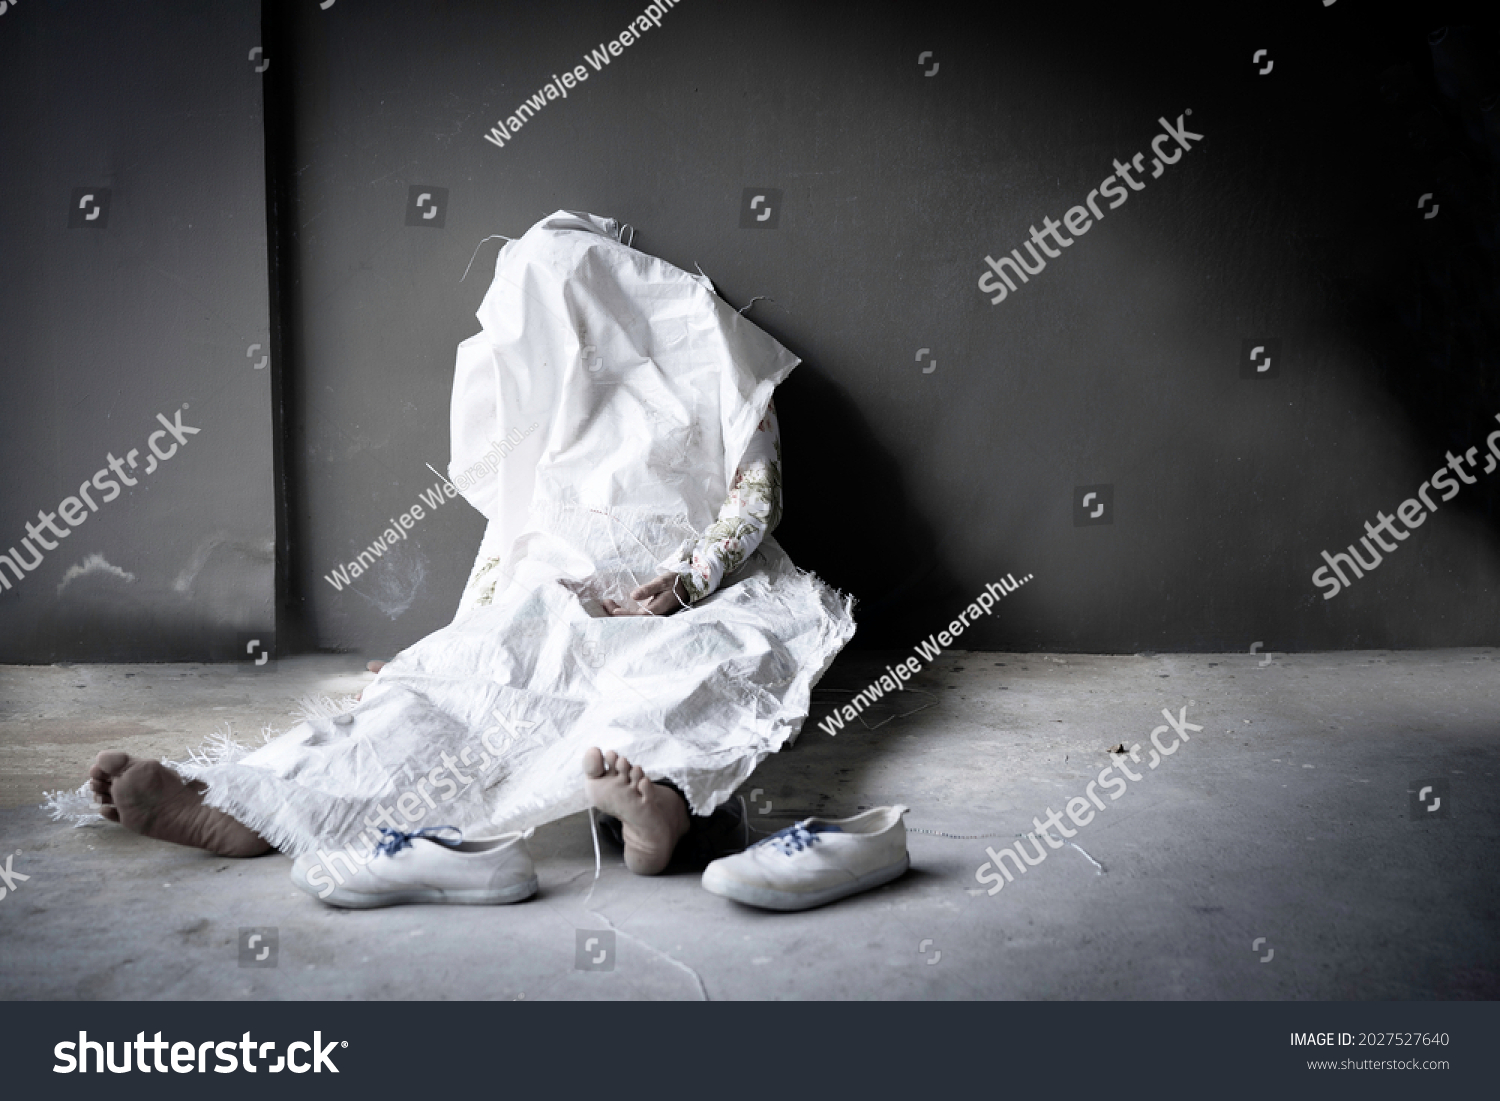 Dead person die in sitting position againt dark brown wall and concret floor with blurred shoes and bare foot was wrapped by white sack with copy space. #2027527640